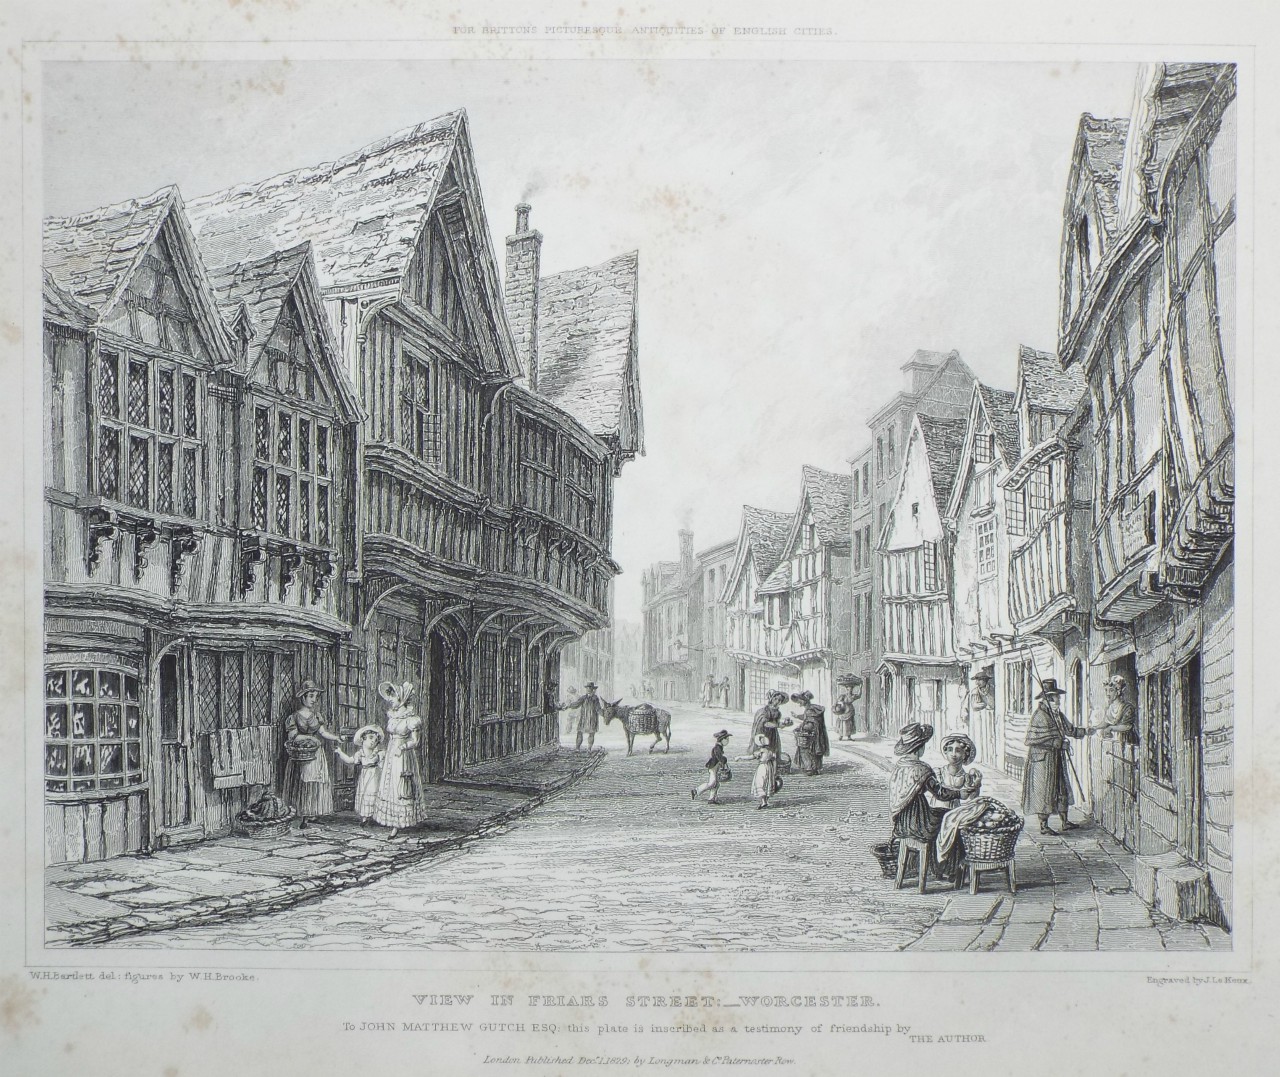 Print - View in Friars Street: Worcester. - Le